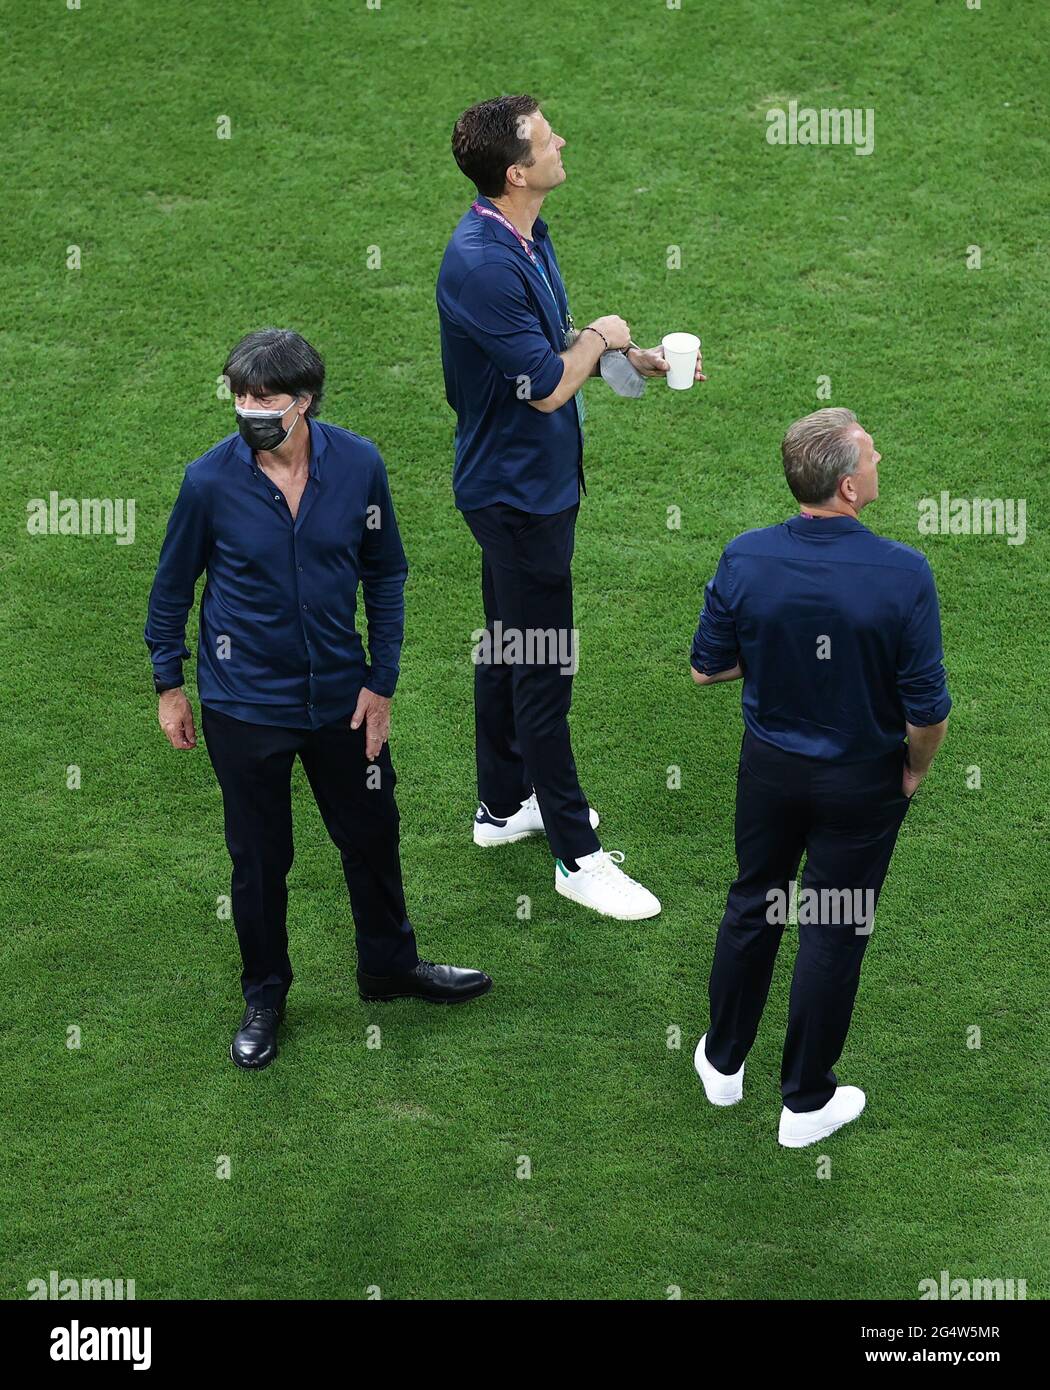 Munich, Germany. 23rd June, 2021. Football: European Championship, Germany - Hungary, preliminary round, Group F, match day 3 at the EM Arena in Munich. German coach Joachim Löw, Oliver Bierhoff, team manager of the German national team, and Andreas Köpke (l-r), goalkeeper coach, are on the pitch. Credit: Christian Charisius/dpa/Alamy Live News Stock Photo